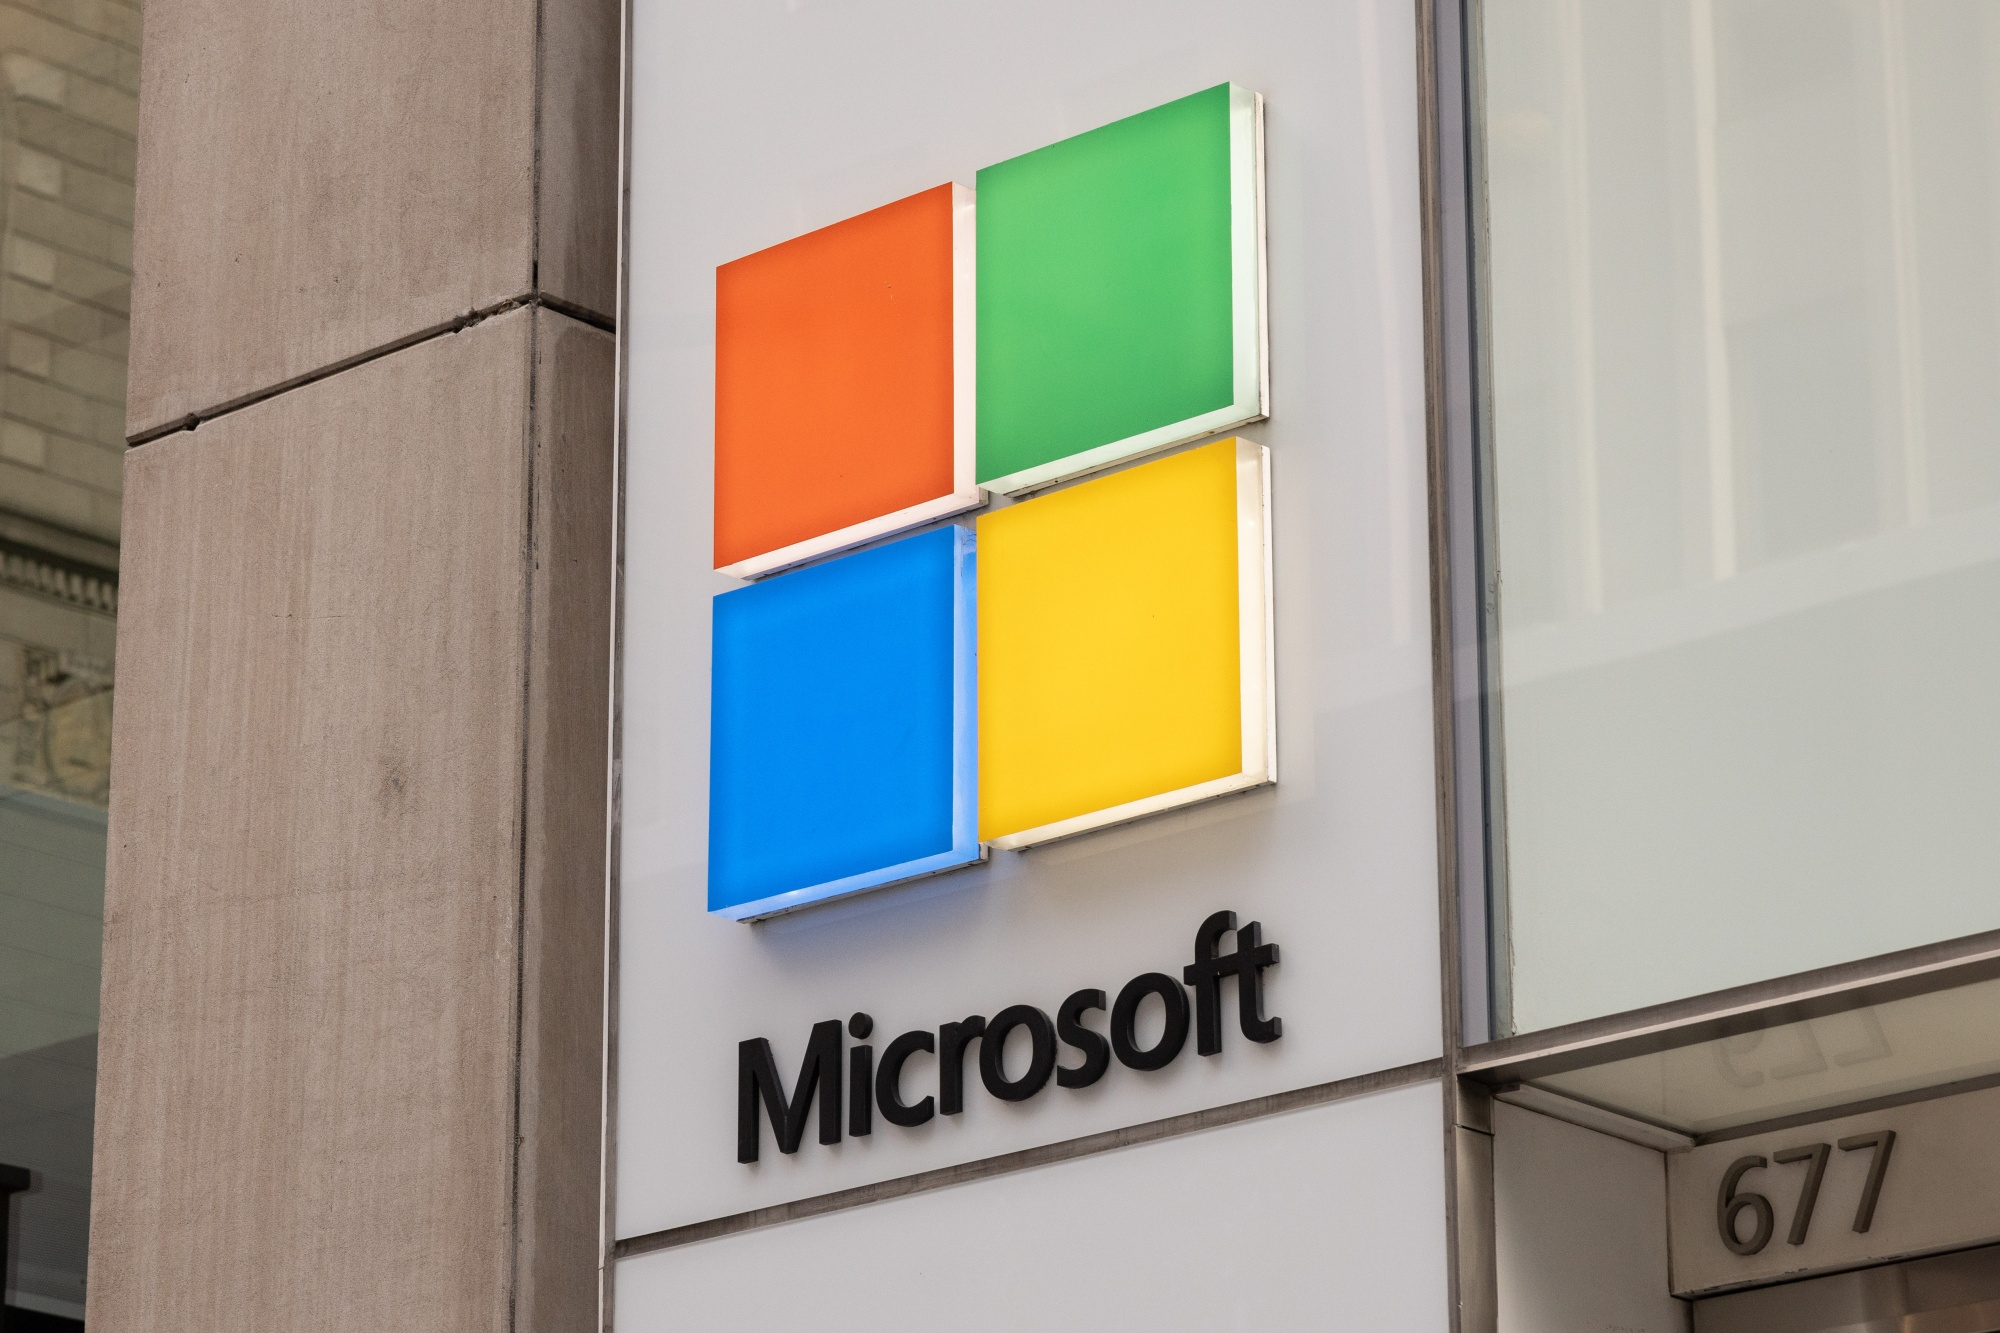 Microsoft has negotiated the first union contract regulating the use of AI